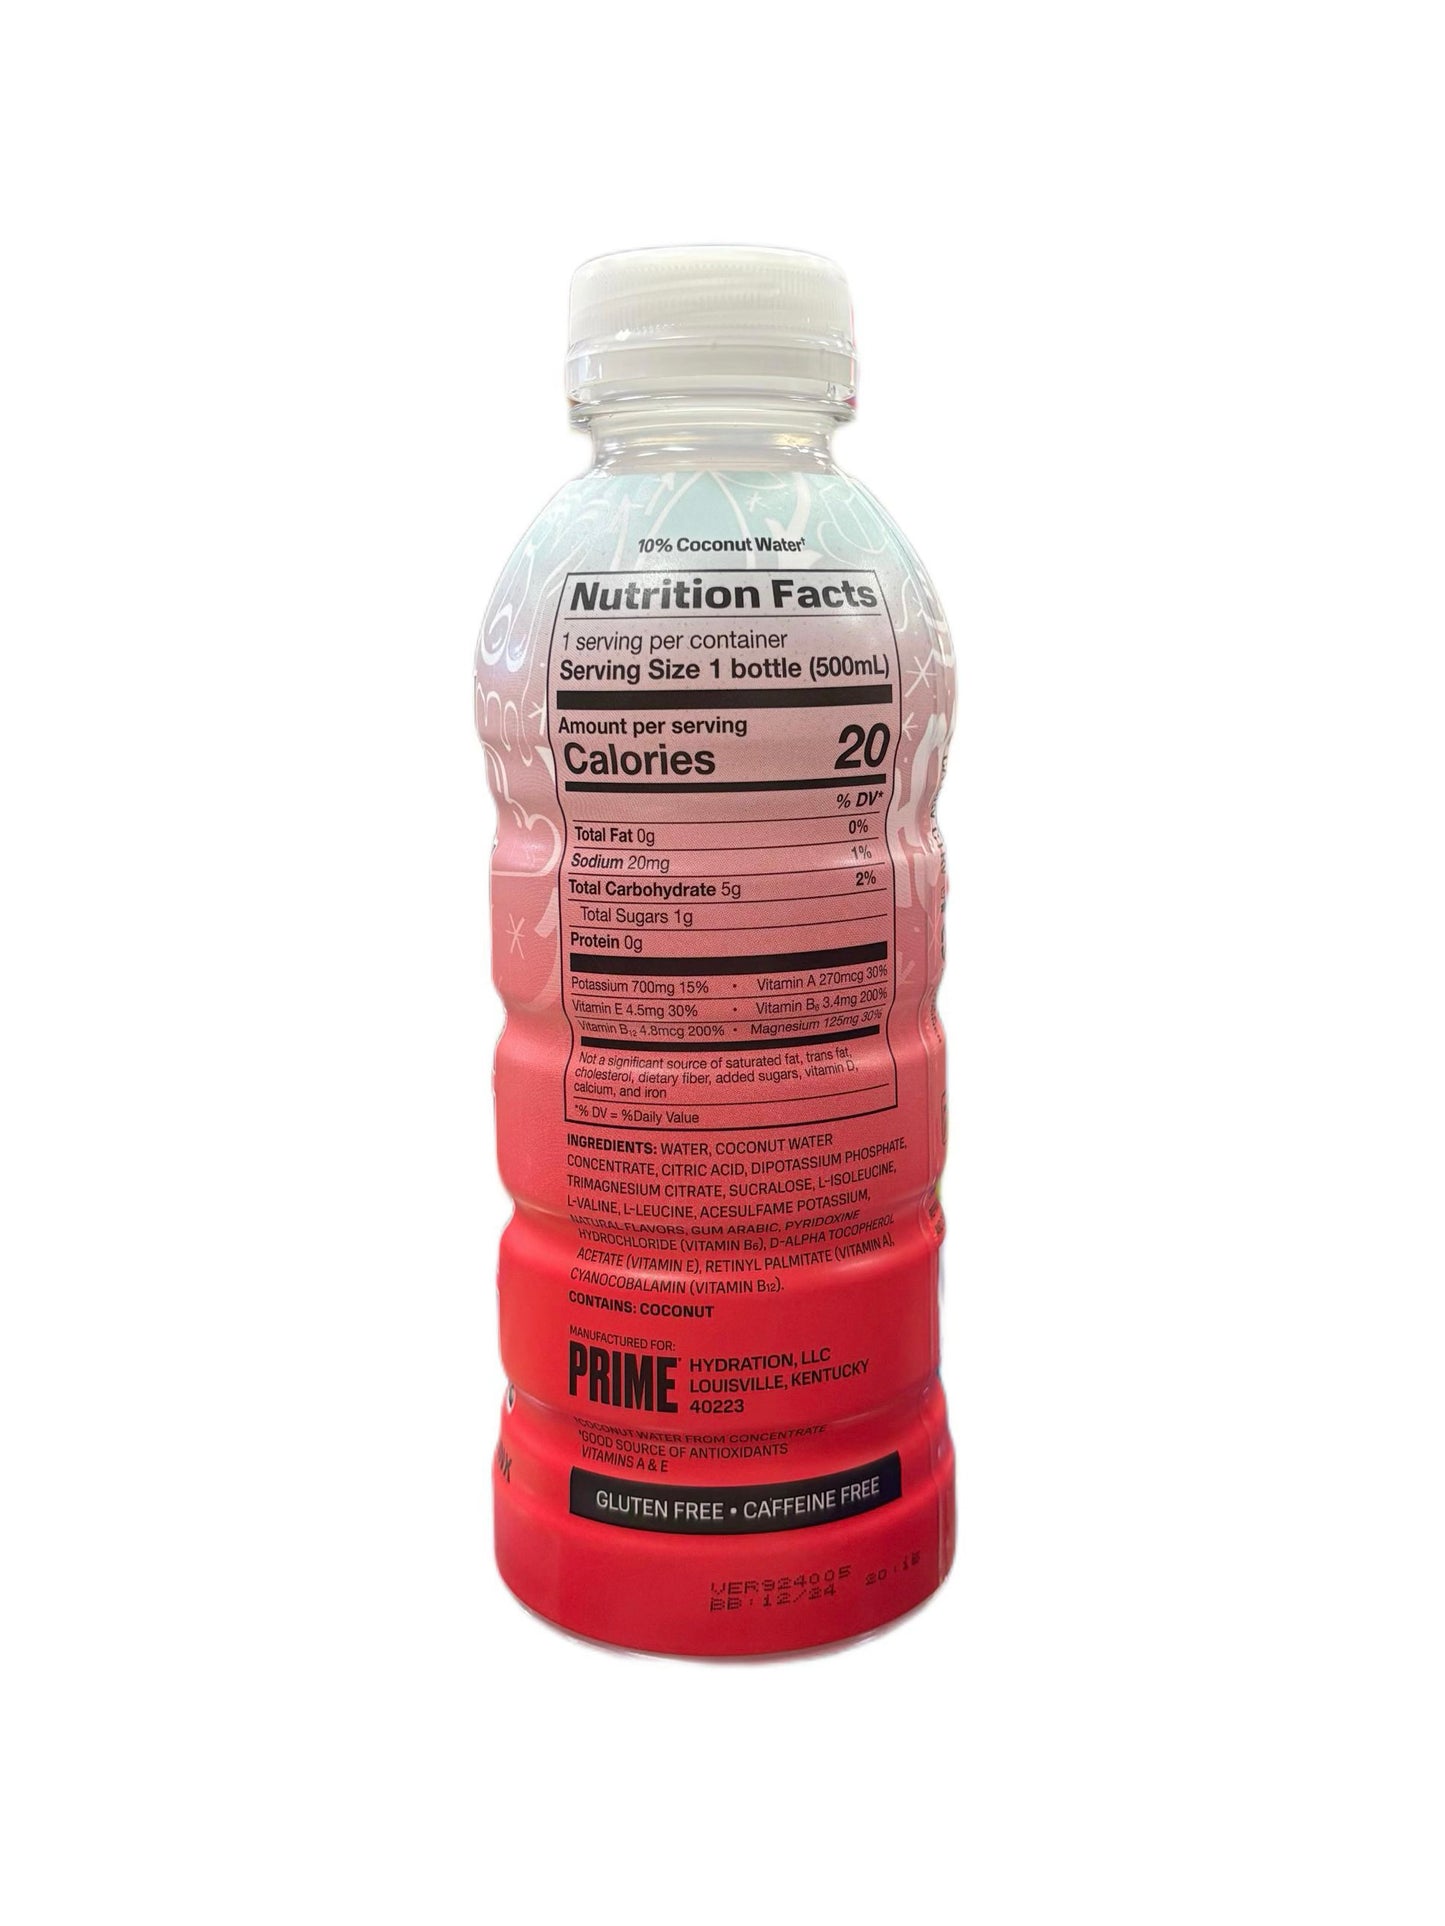 Prime Hydration Cherry Freeze Ultra Rare Special Edition - Extreme Snacks